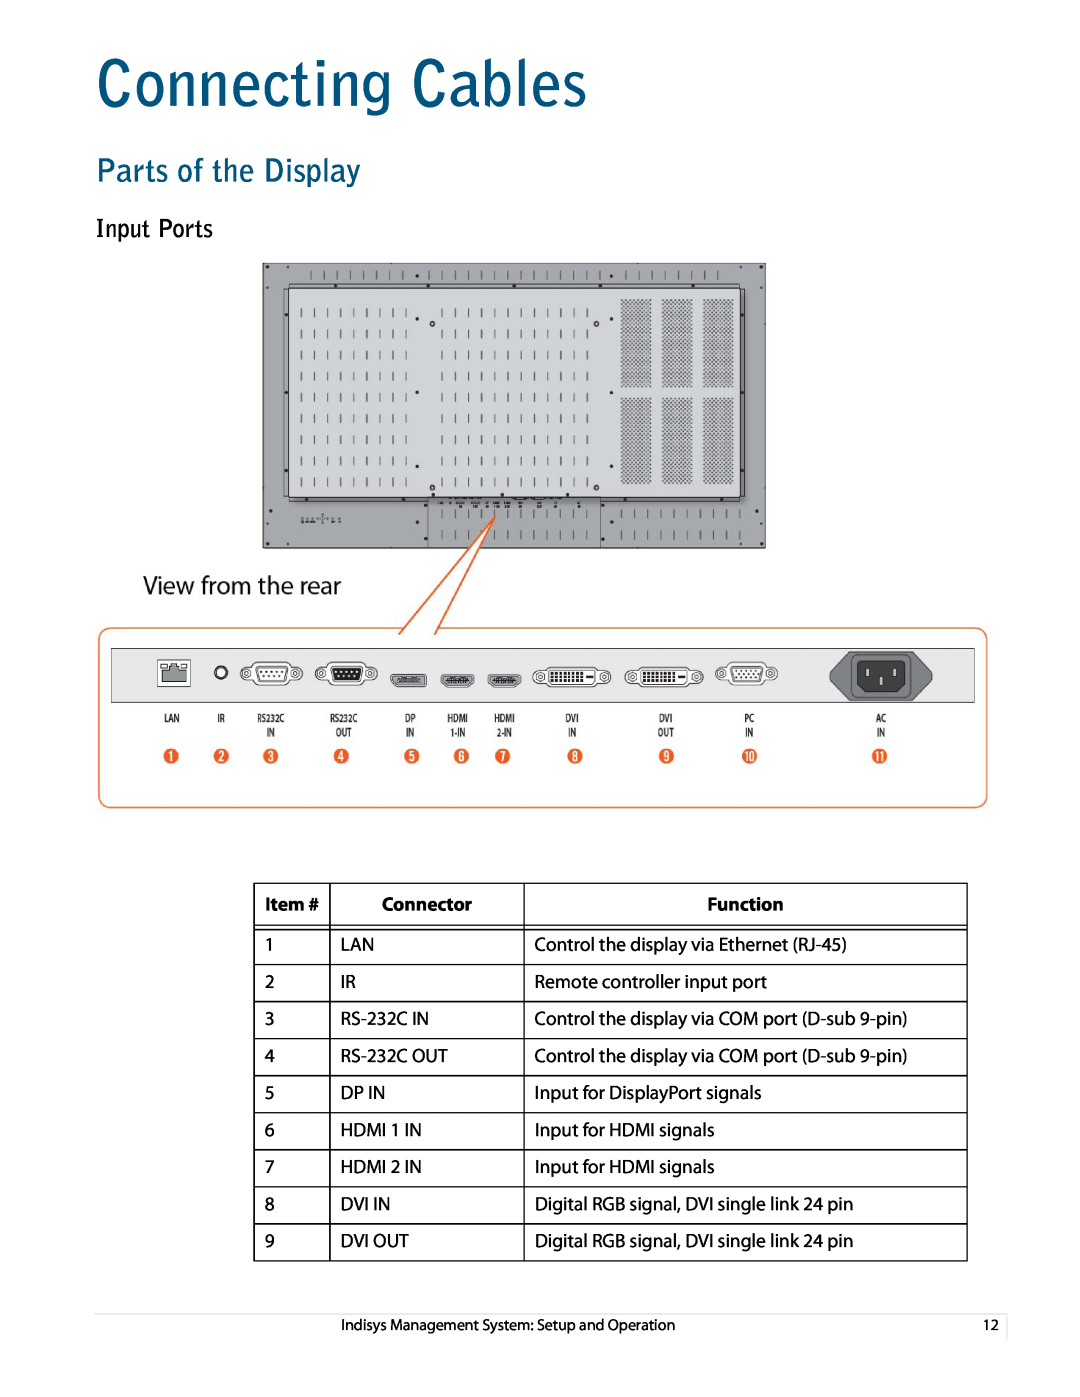 Planar PS5580 manual Connecting Cables, Parts of the Display, Input Ports, Item #, Connector, Function 